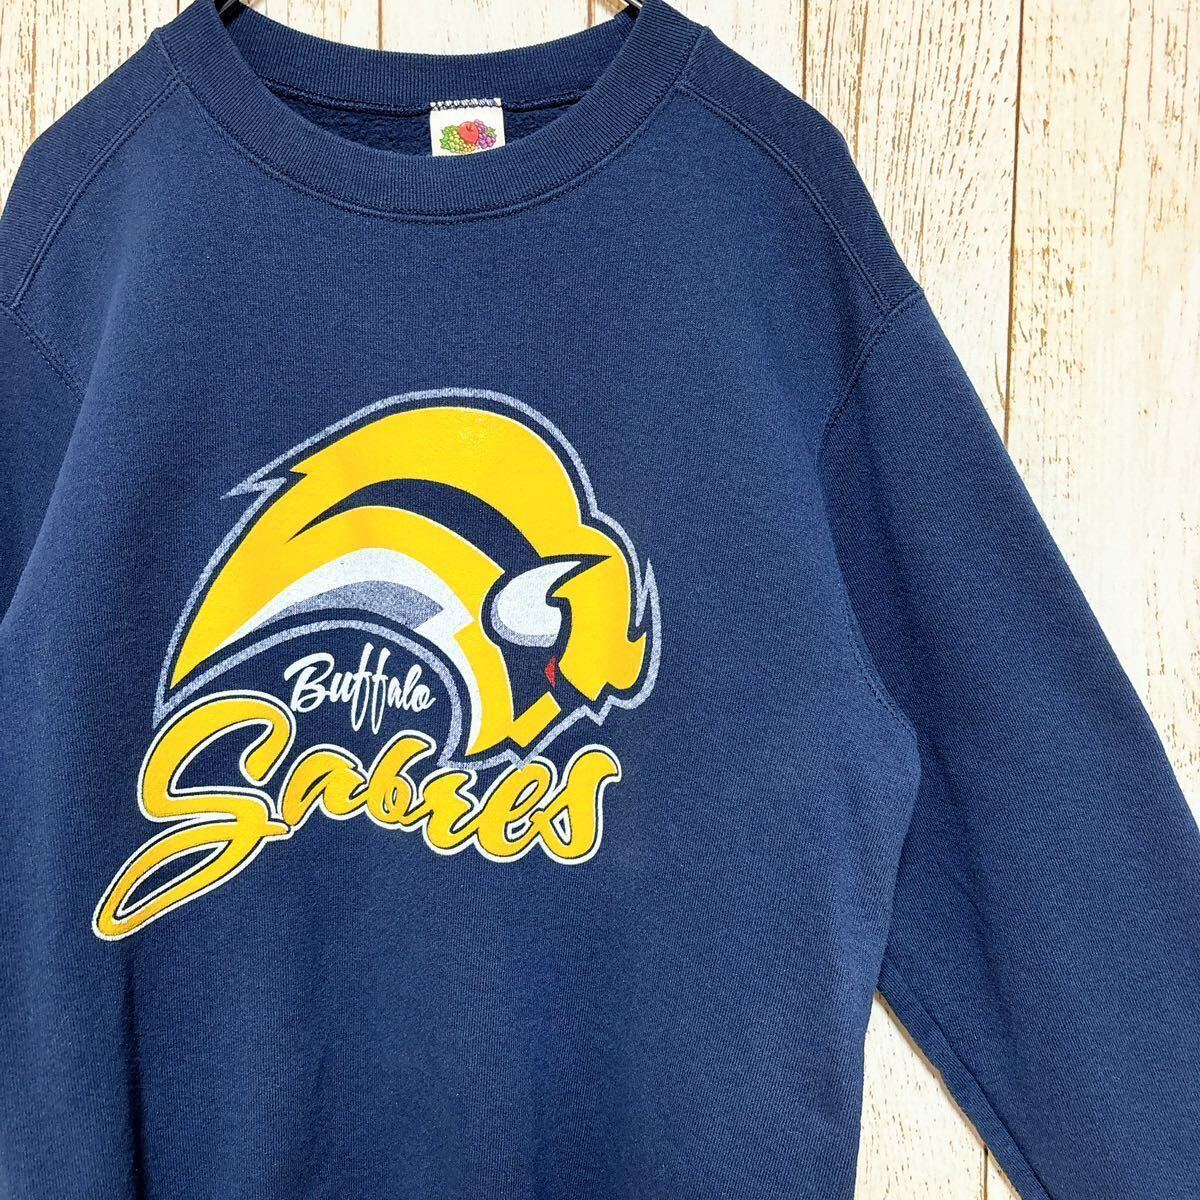 90s FRUIT OF THE LOOM NHL Buffalo Sabres バッファロー・セイバーズ プリント スウェット トレーナー S USA古着 アメリカ古着_画像1